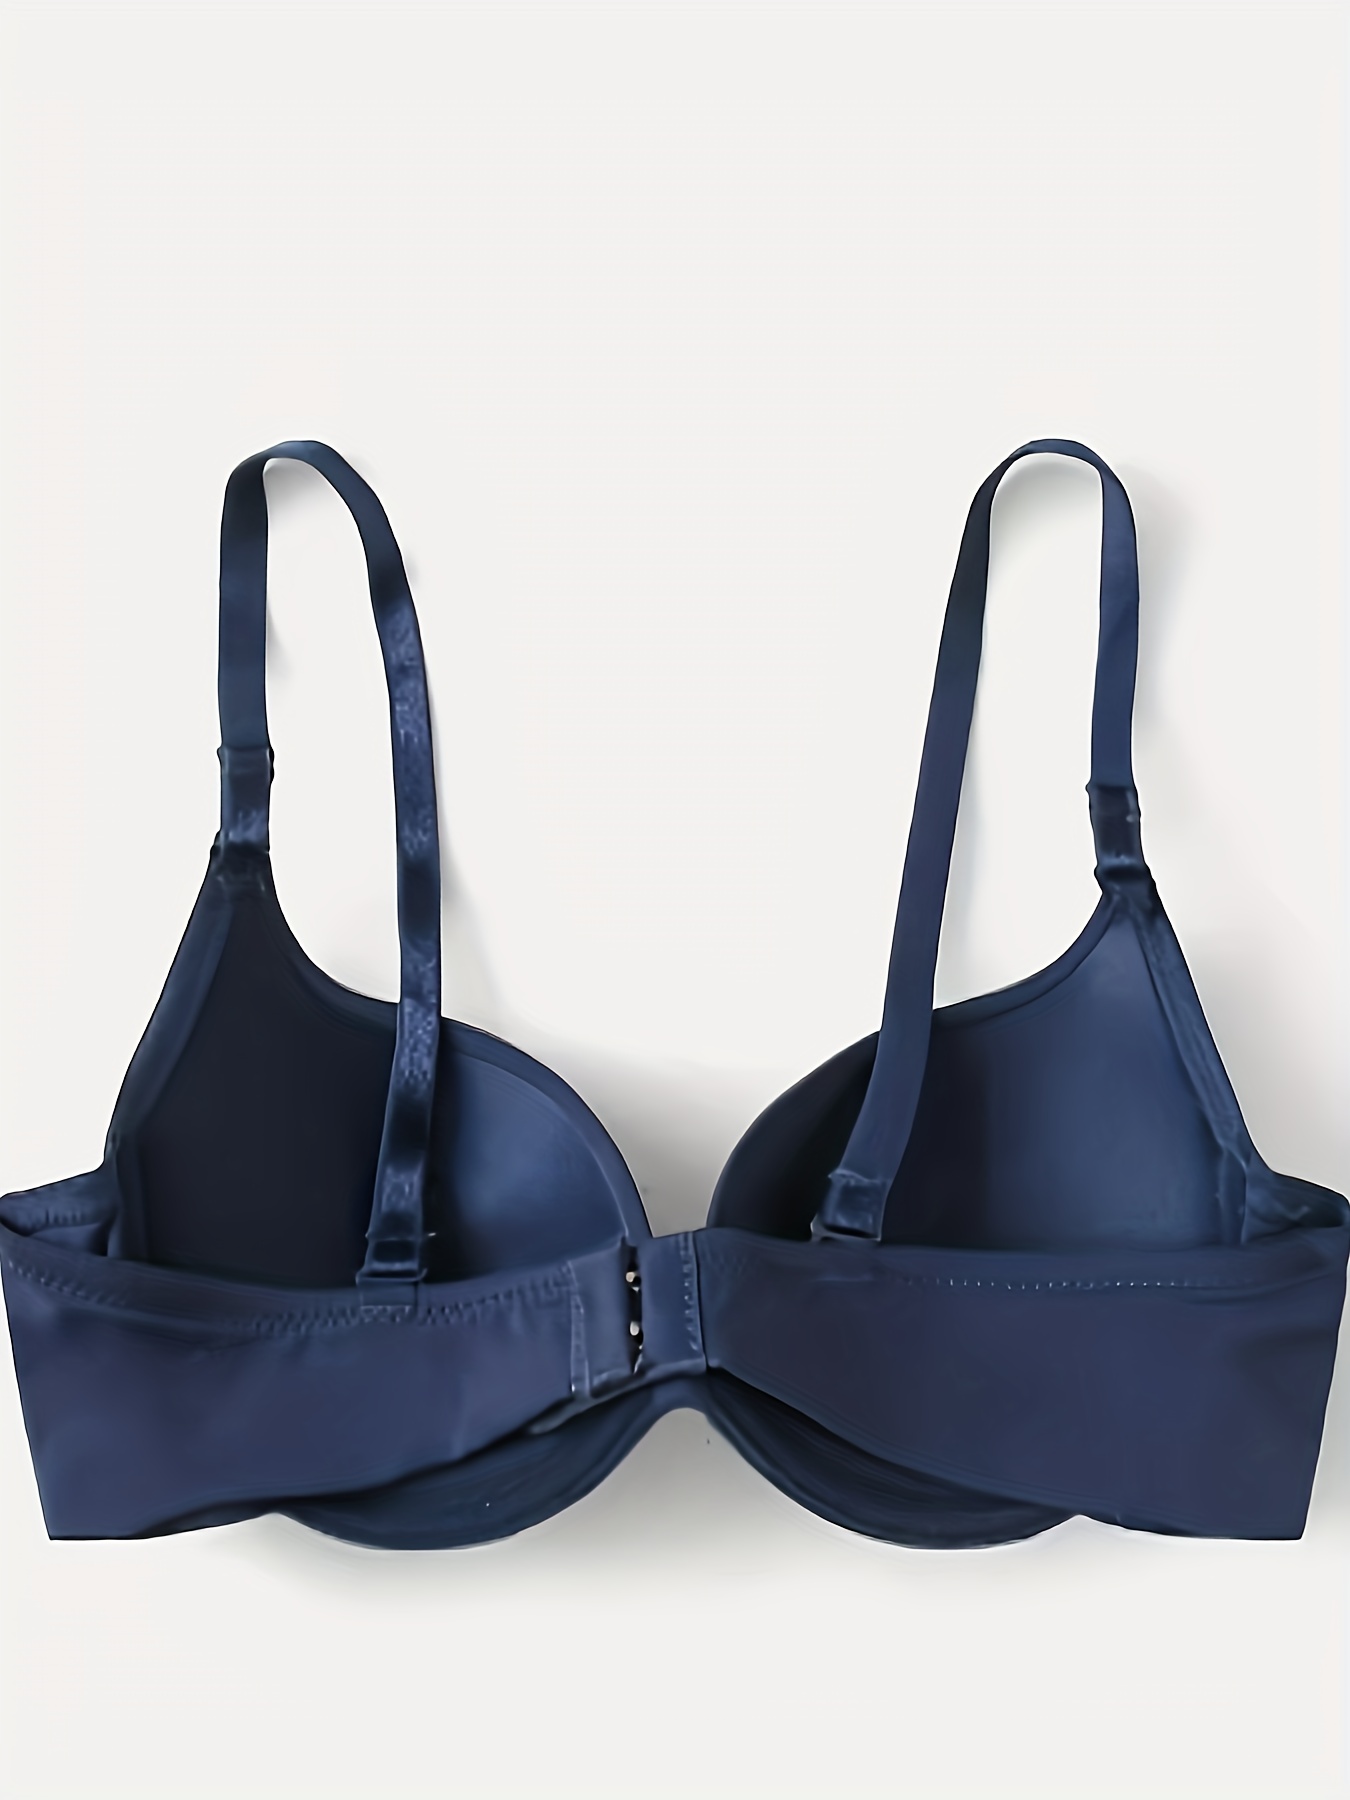 Buy online Blue Solid T-shirt Bra from lingerie for Women by Susie for ₹399  at 50% off